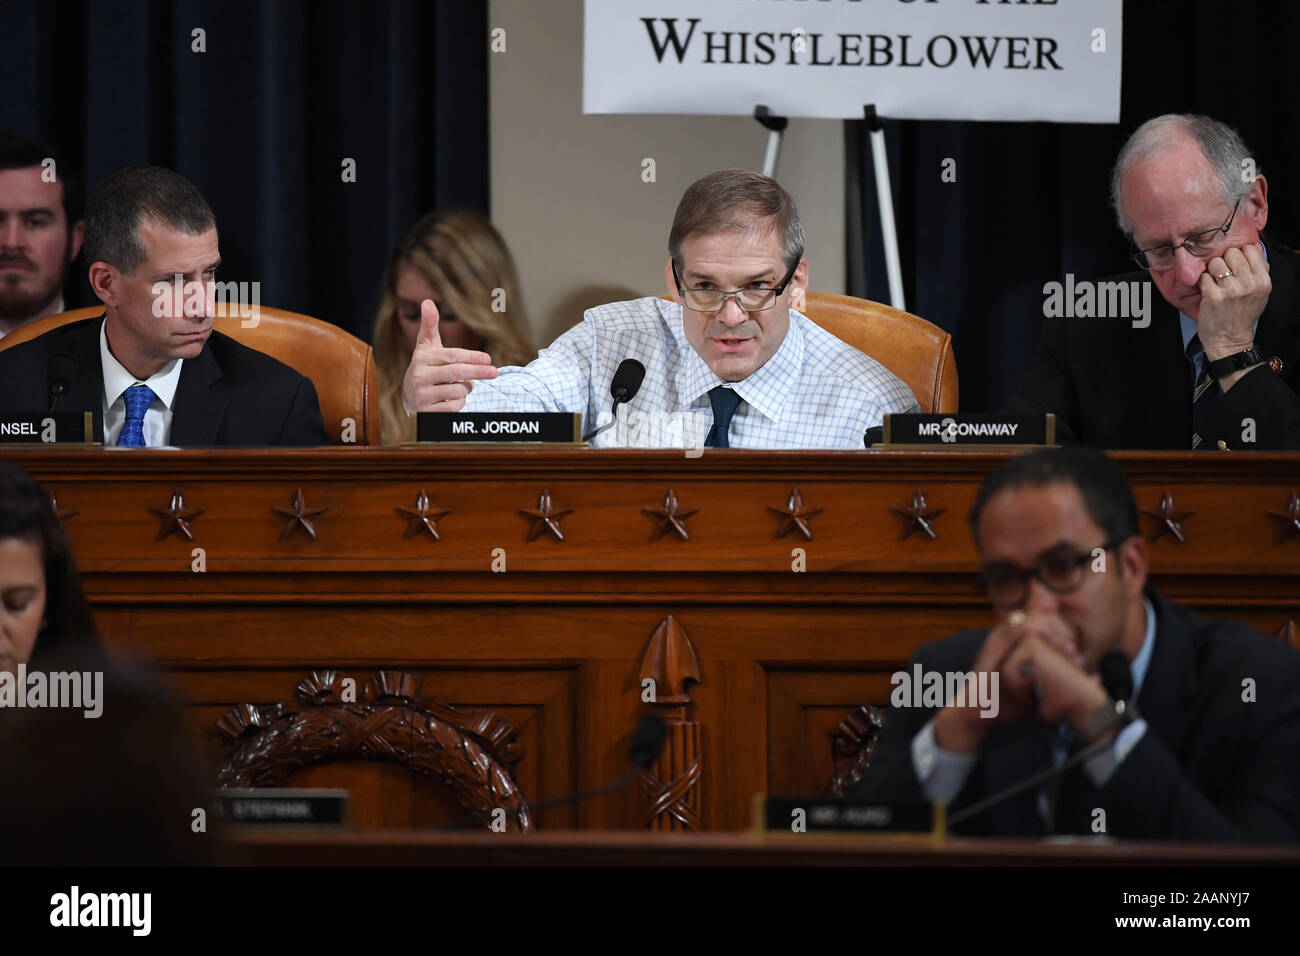 United States Representative Jim Jordan (Republican of Ohio) asks questions as David A. Holmes, Department of State political counselor for the US Embassy in Kyiv, Ukraine and Dr. Fiona Hill, former National Security Council senior director for Europe and Russia appear before the House Intelligence Committee during an impeachment inquiry hearing at the Longworth House Office Building on Thursday November 21, 2019 in Washington, DC. Pictured at left is Steve Castor, general counsel for the US House Oversight and Government Reform Committee and at right is US Representative Mike Conaway (Republi Stock Photo